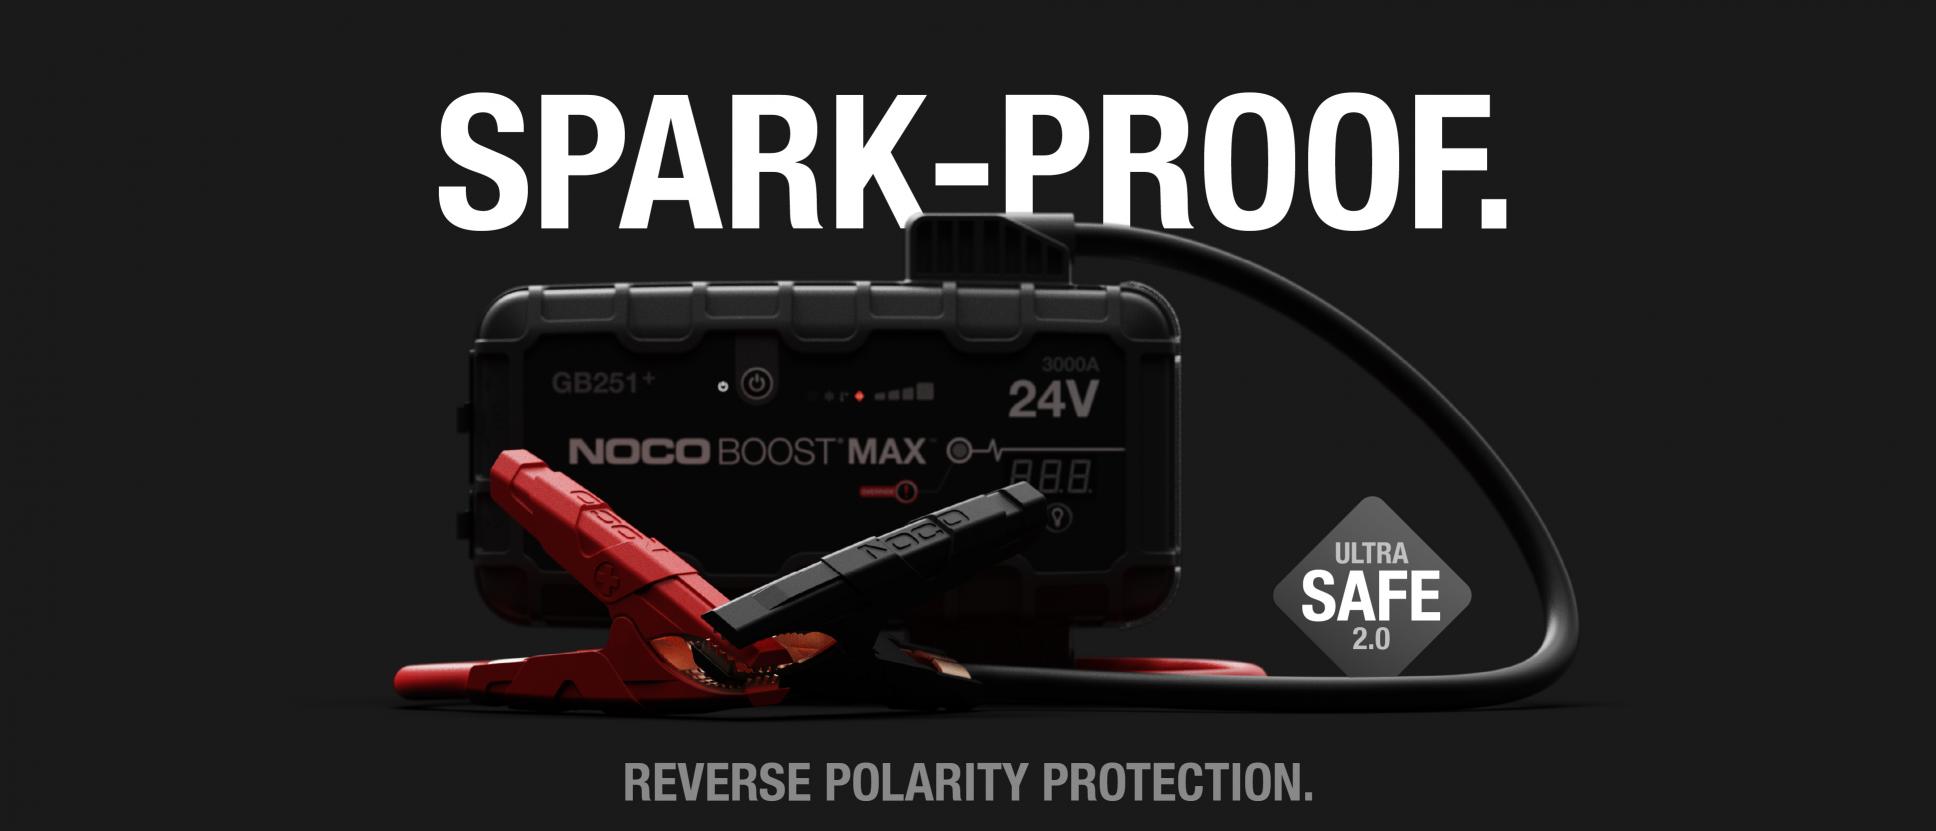 Lithium booster jump starter Noco GB251. Spark proof. Reverse polarity protection.